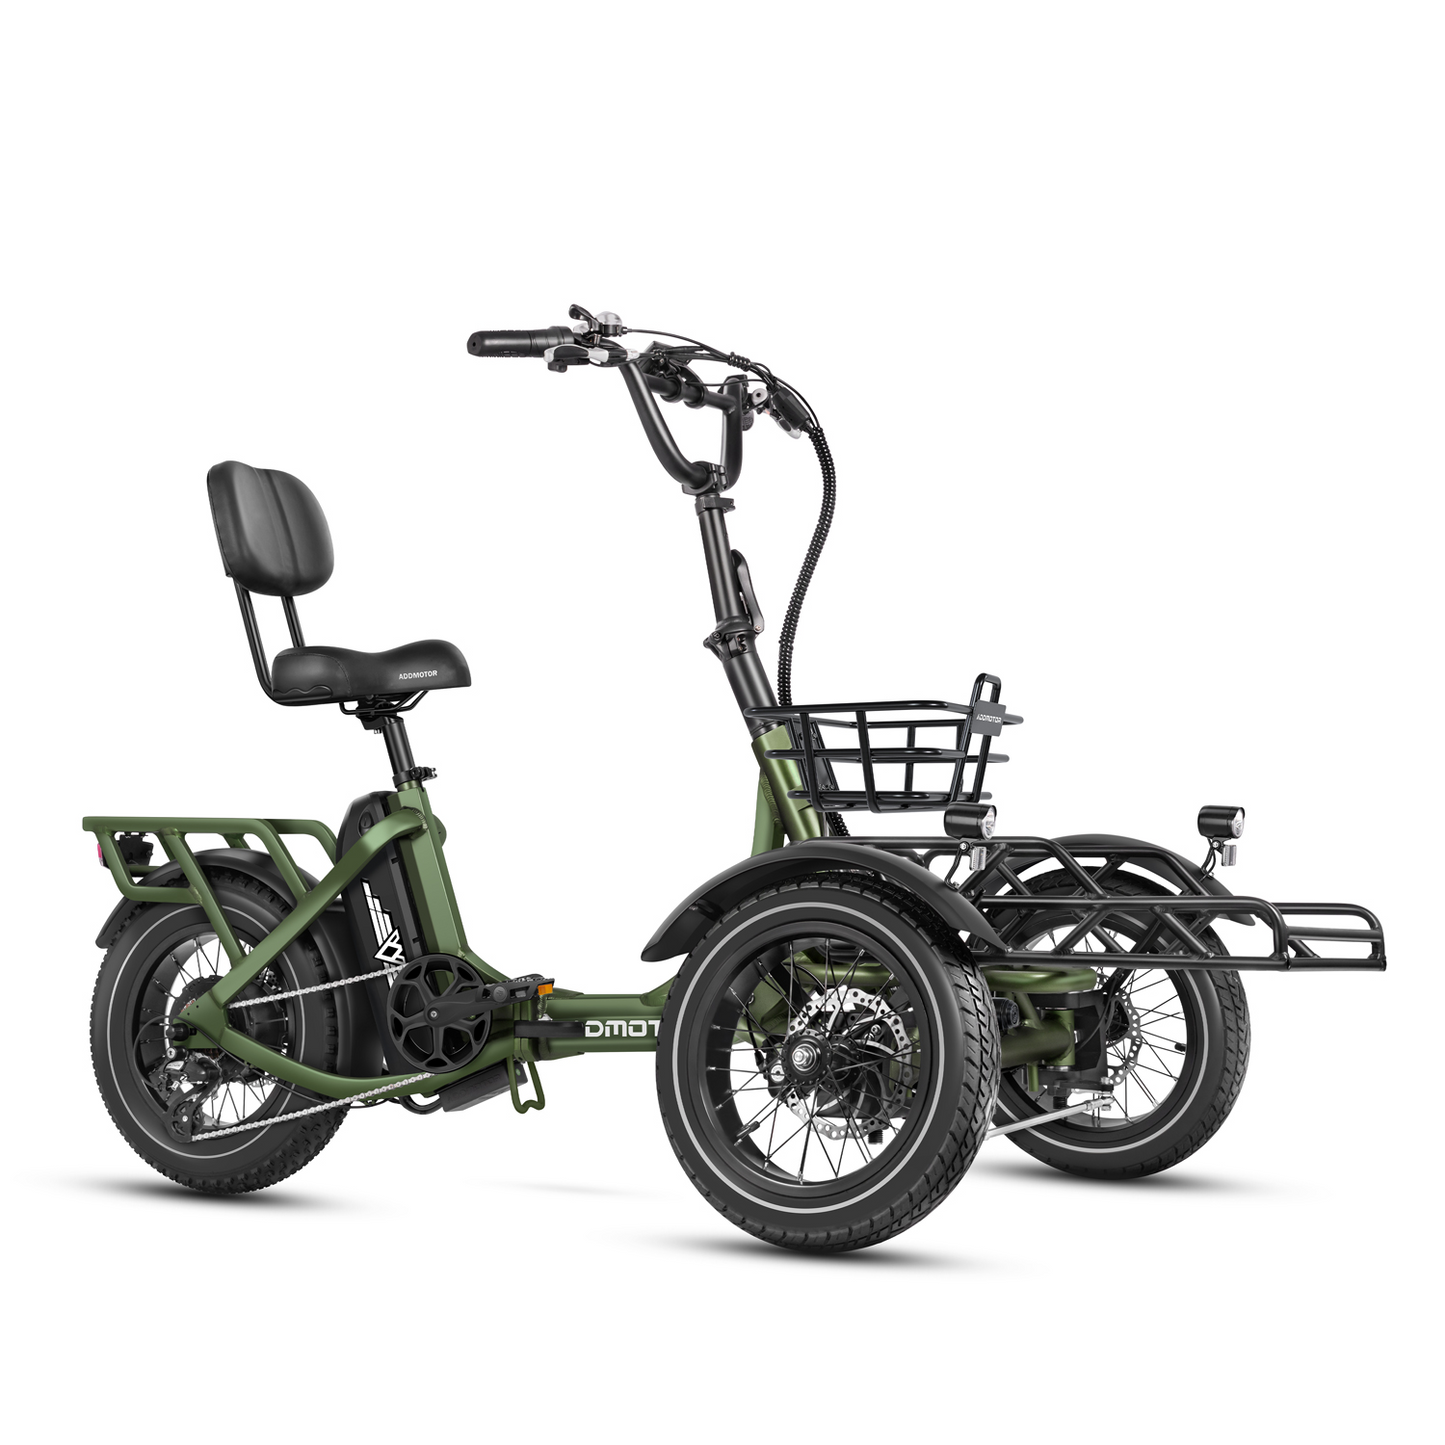 A dark green Addmotor SPYTAN electric cargo bike with a long seat and baskets on the front and rear, positioned on a plain white background.